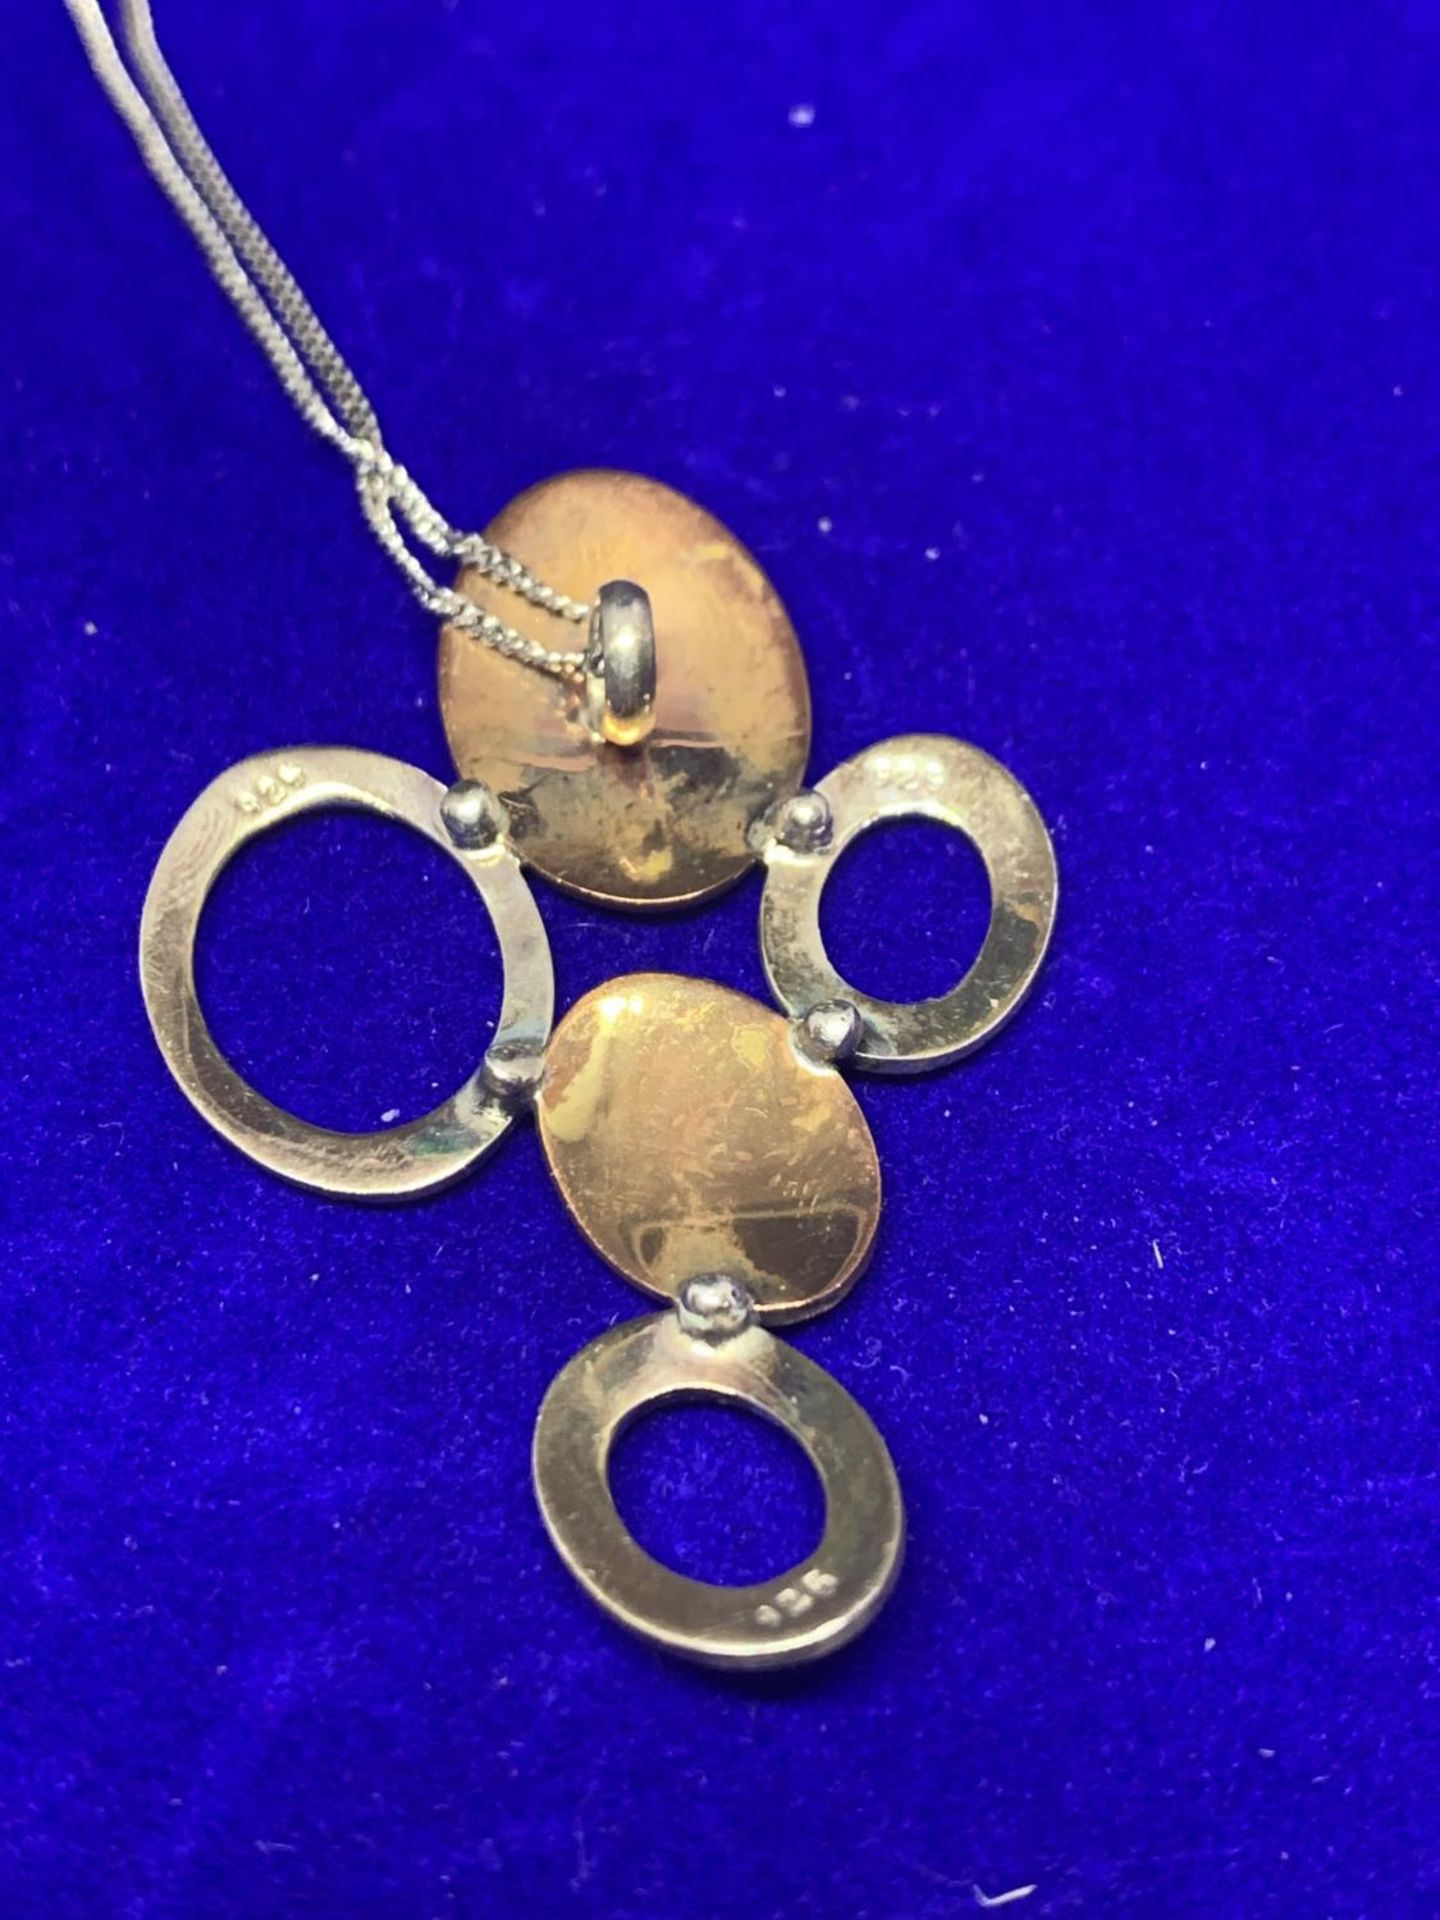 A SILVER NECKLACE WITH A YELLOW METAL AND SILVER PENDANT MARKED 925 WITH A PRESENTATION BOX - Image 2 of 3